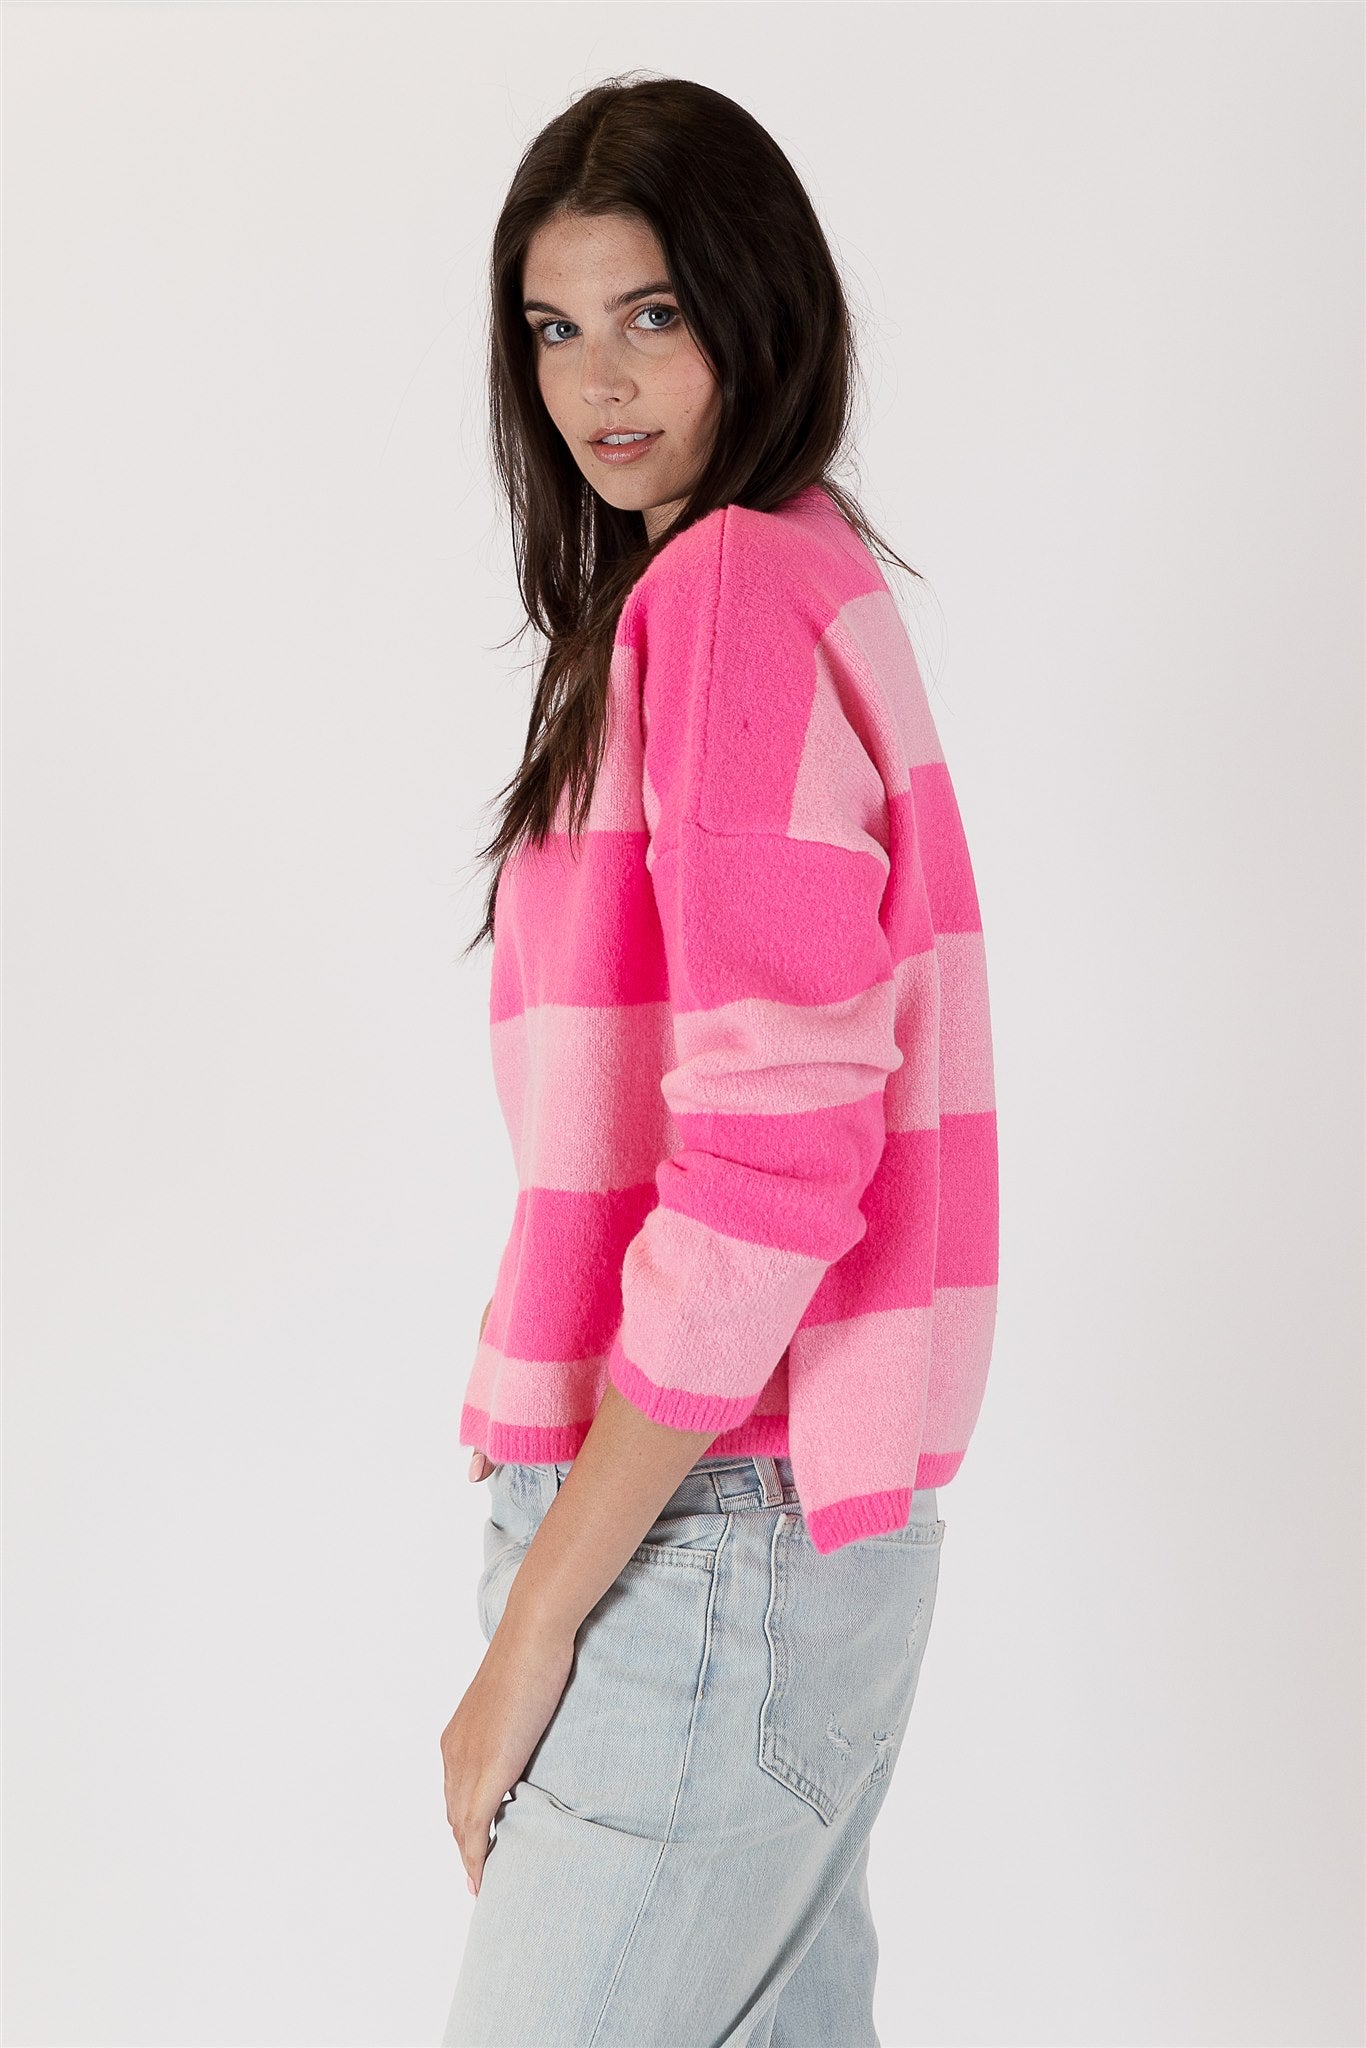 Lyla+Luxe Top - Striped Crop Sweater - Pink